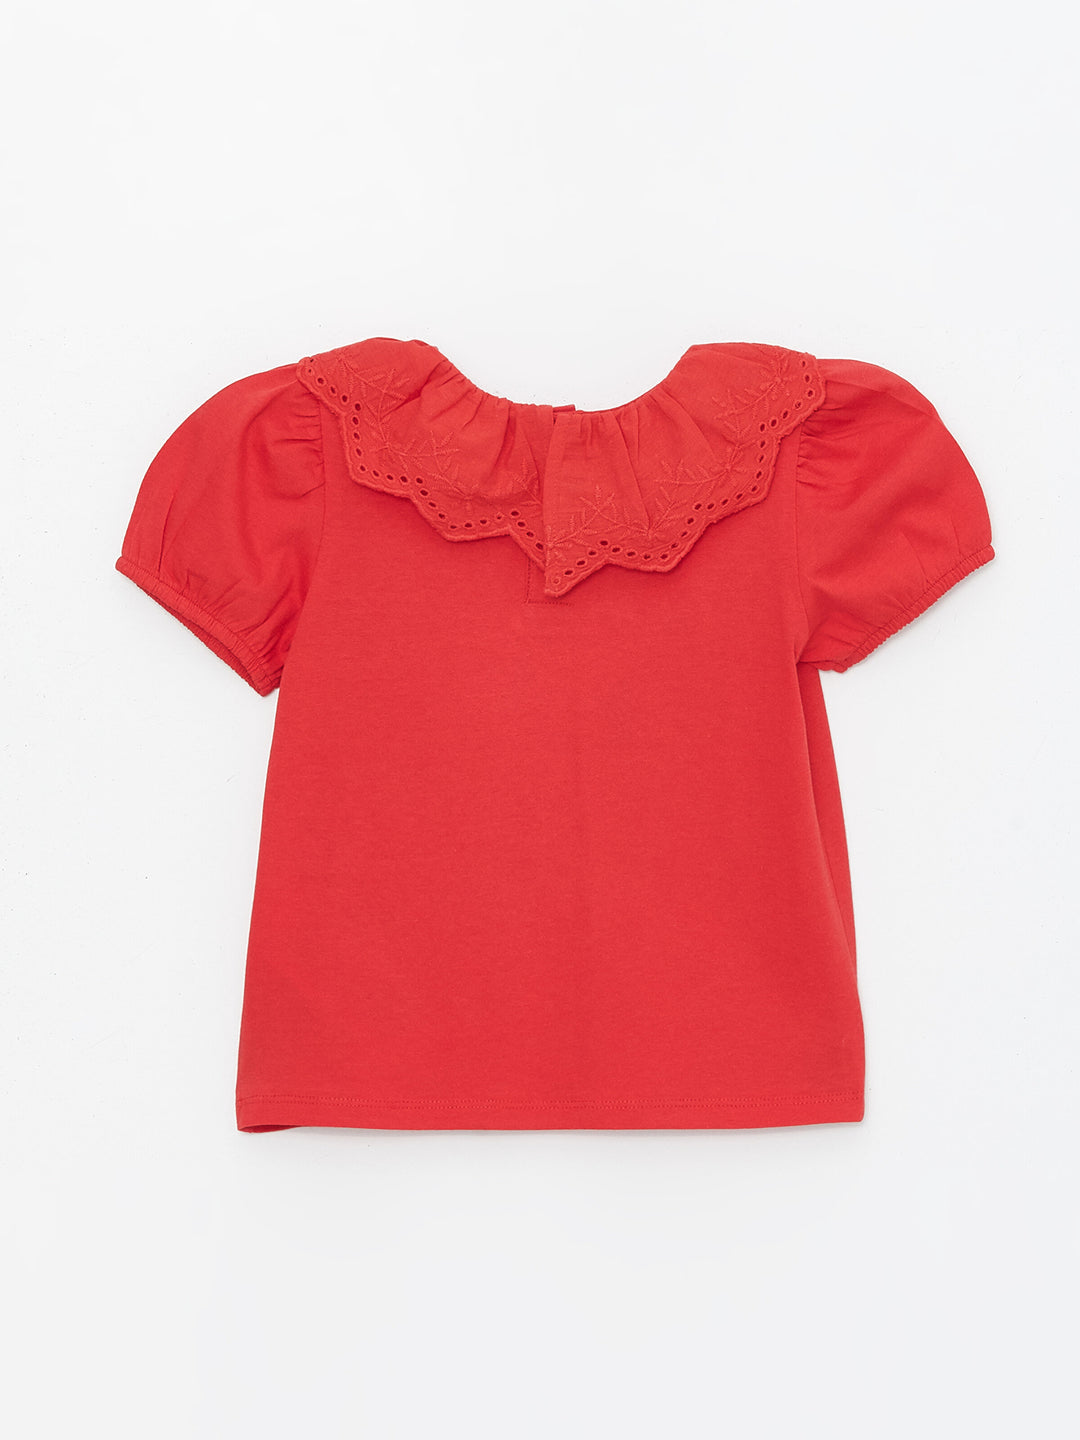 Crew Neck Short Sleeve Baby Girls T-Shirt With Embroidery Detail